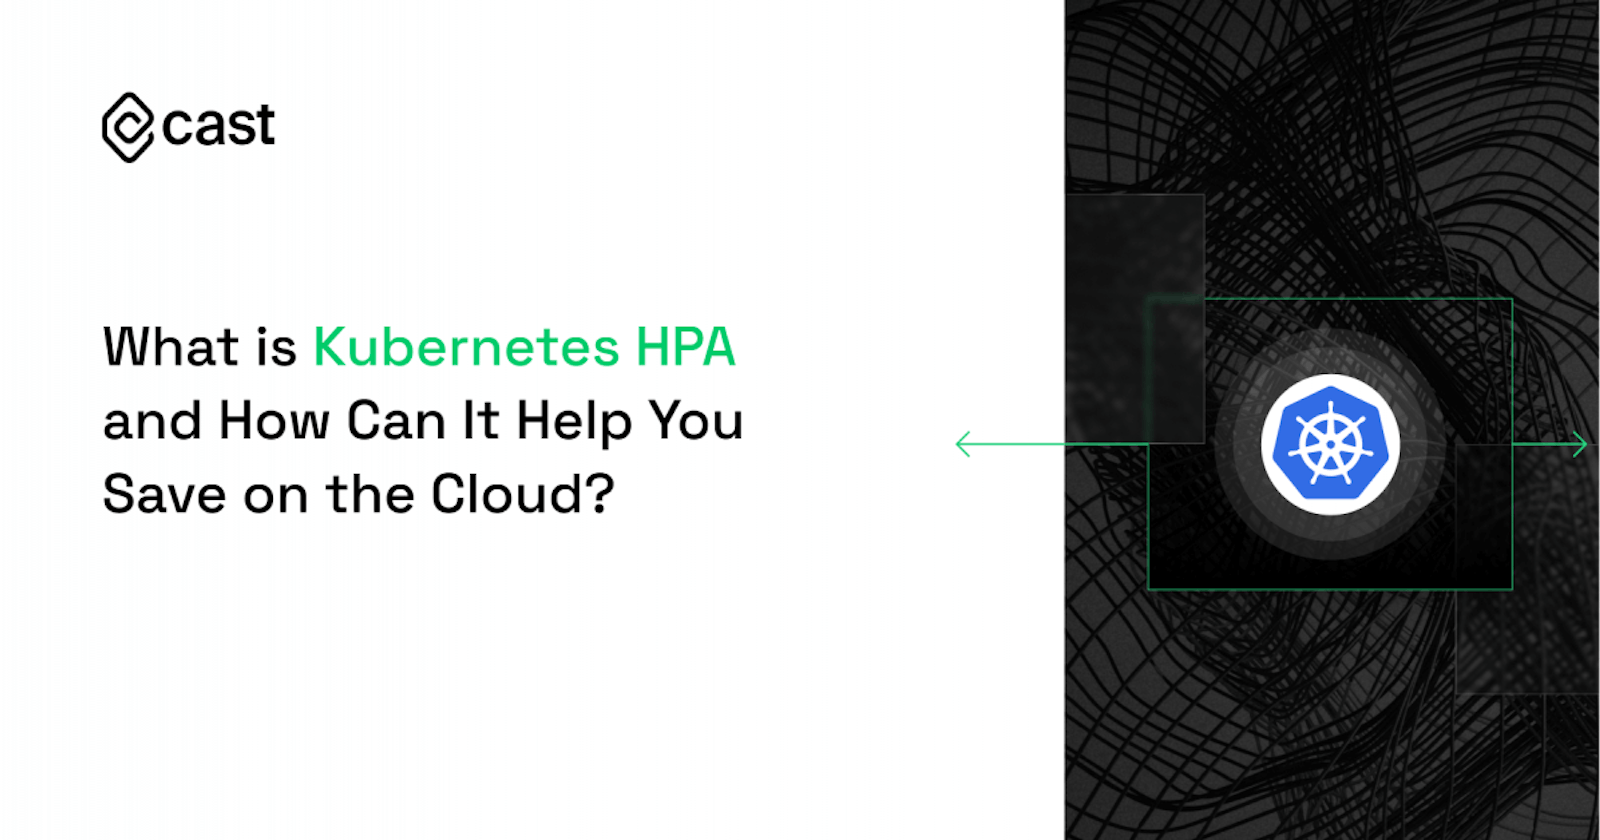 What is Kubernetes HPA and How Can It Help You Save on the Cloud?